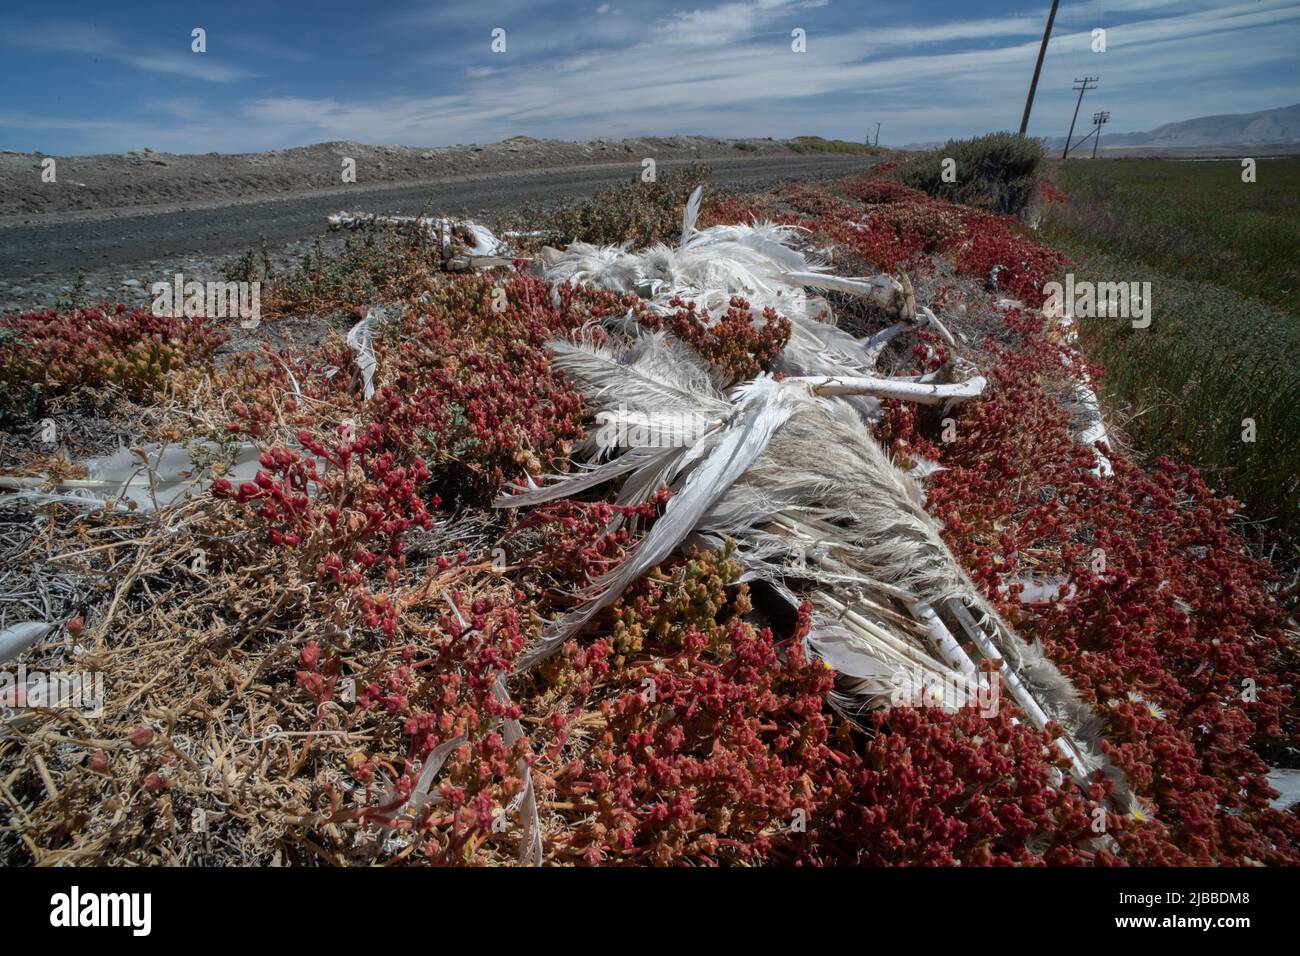 The remains of an American white pelican (Pelecanus erythrorhynchos) resting in slender iceplant (Mesembryanthemum nodiflorum) in the bay area of CA. Stock Photo